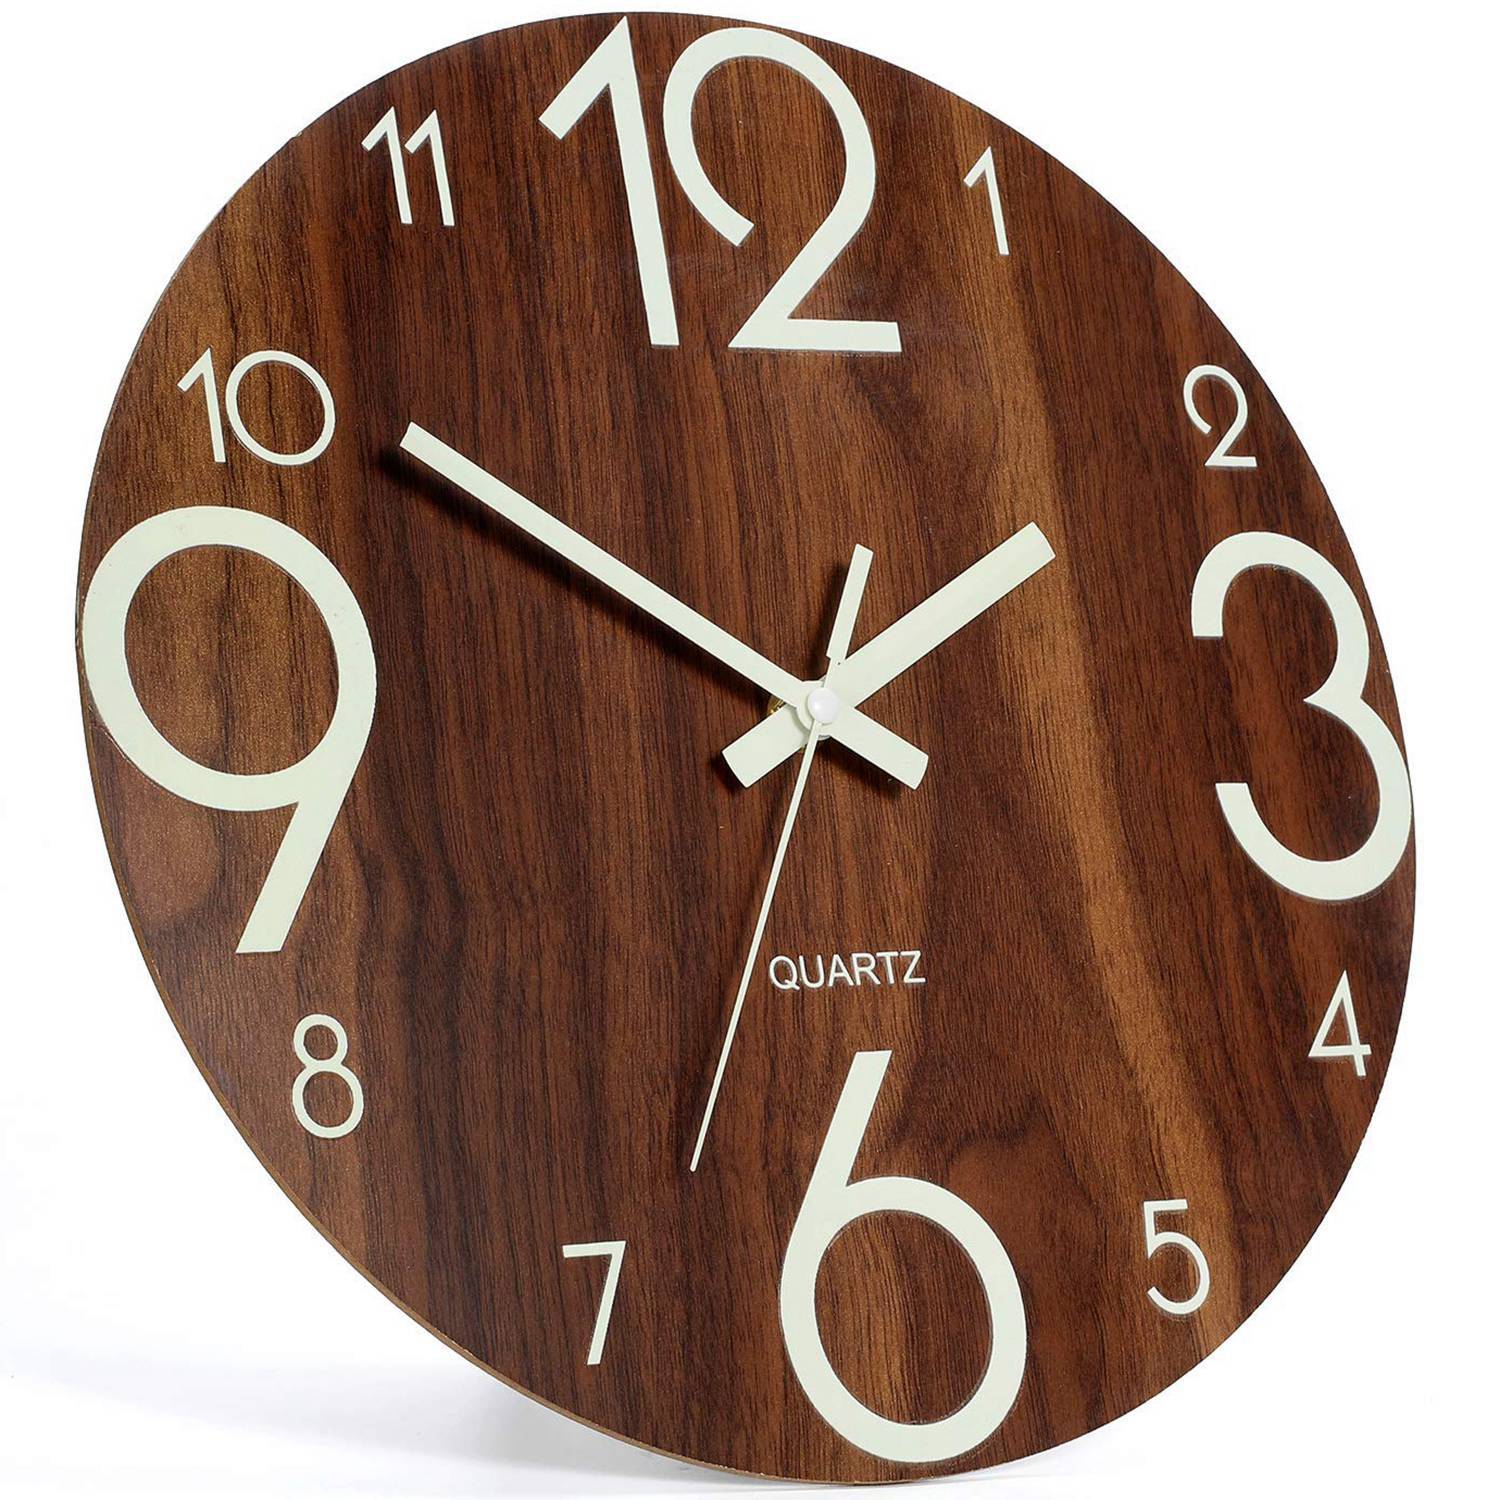 Hot-Luminous Wall Clock 12 Inch Wooden Silent Non-Ticking Wall Clock With Night Lights